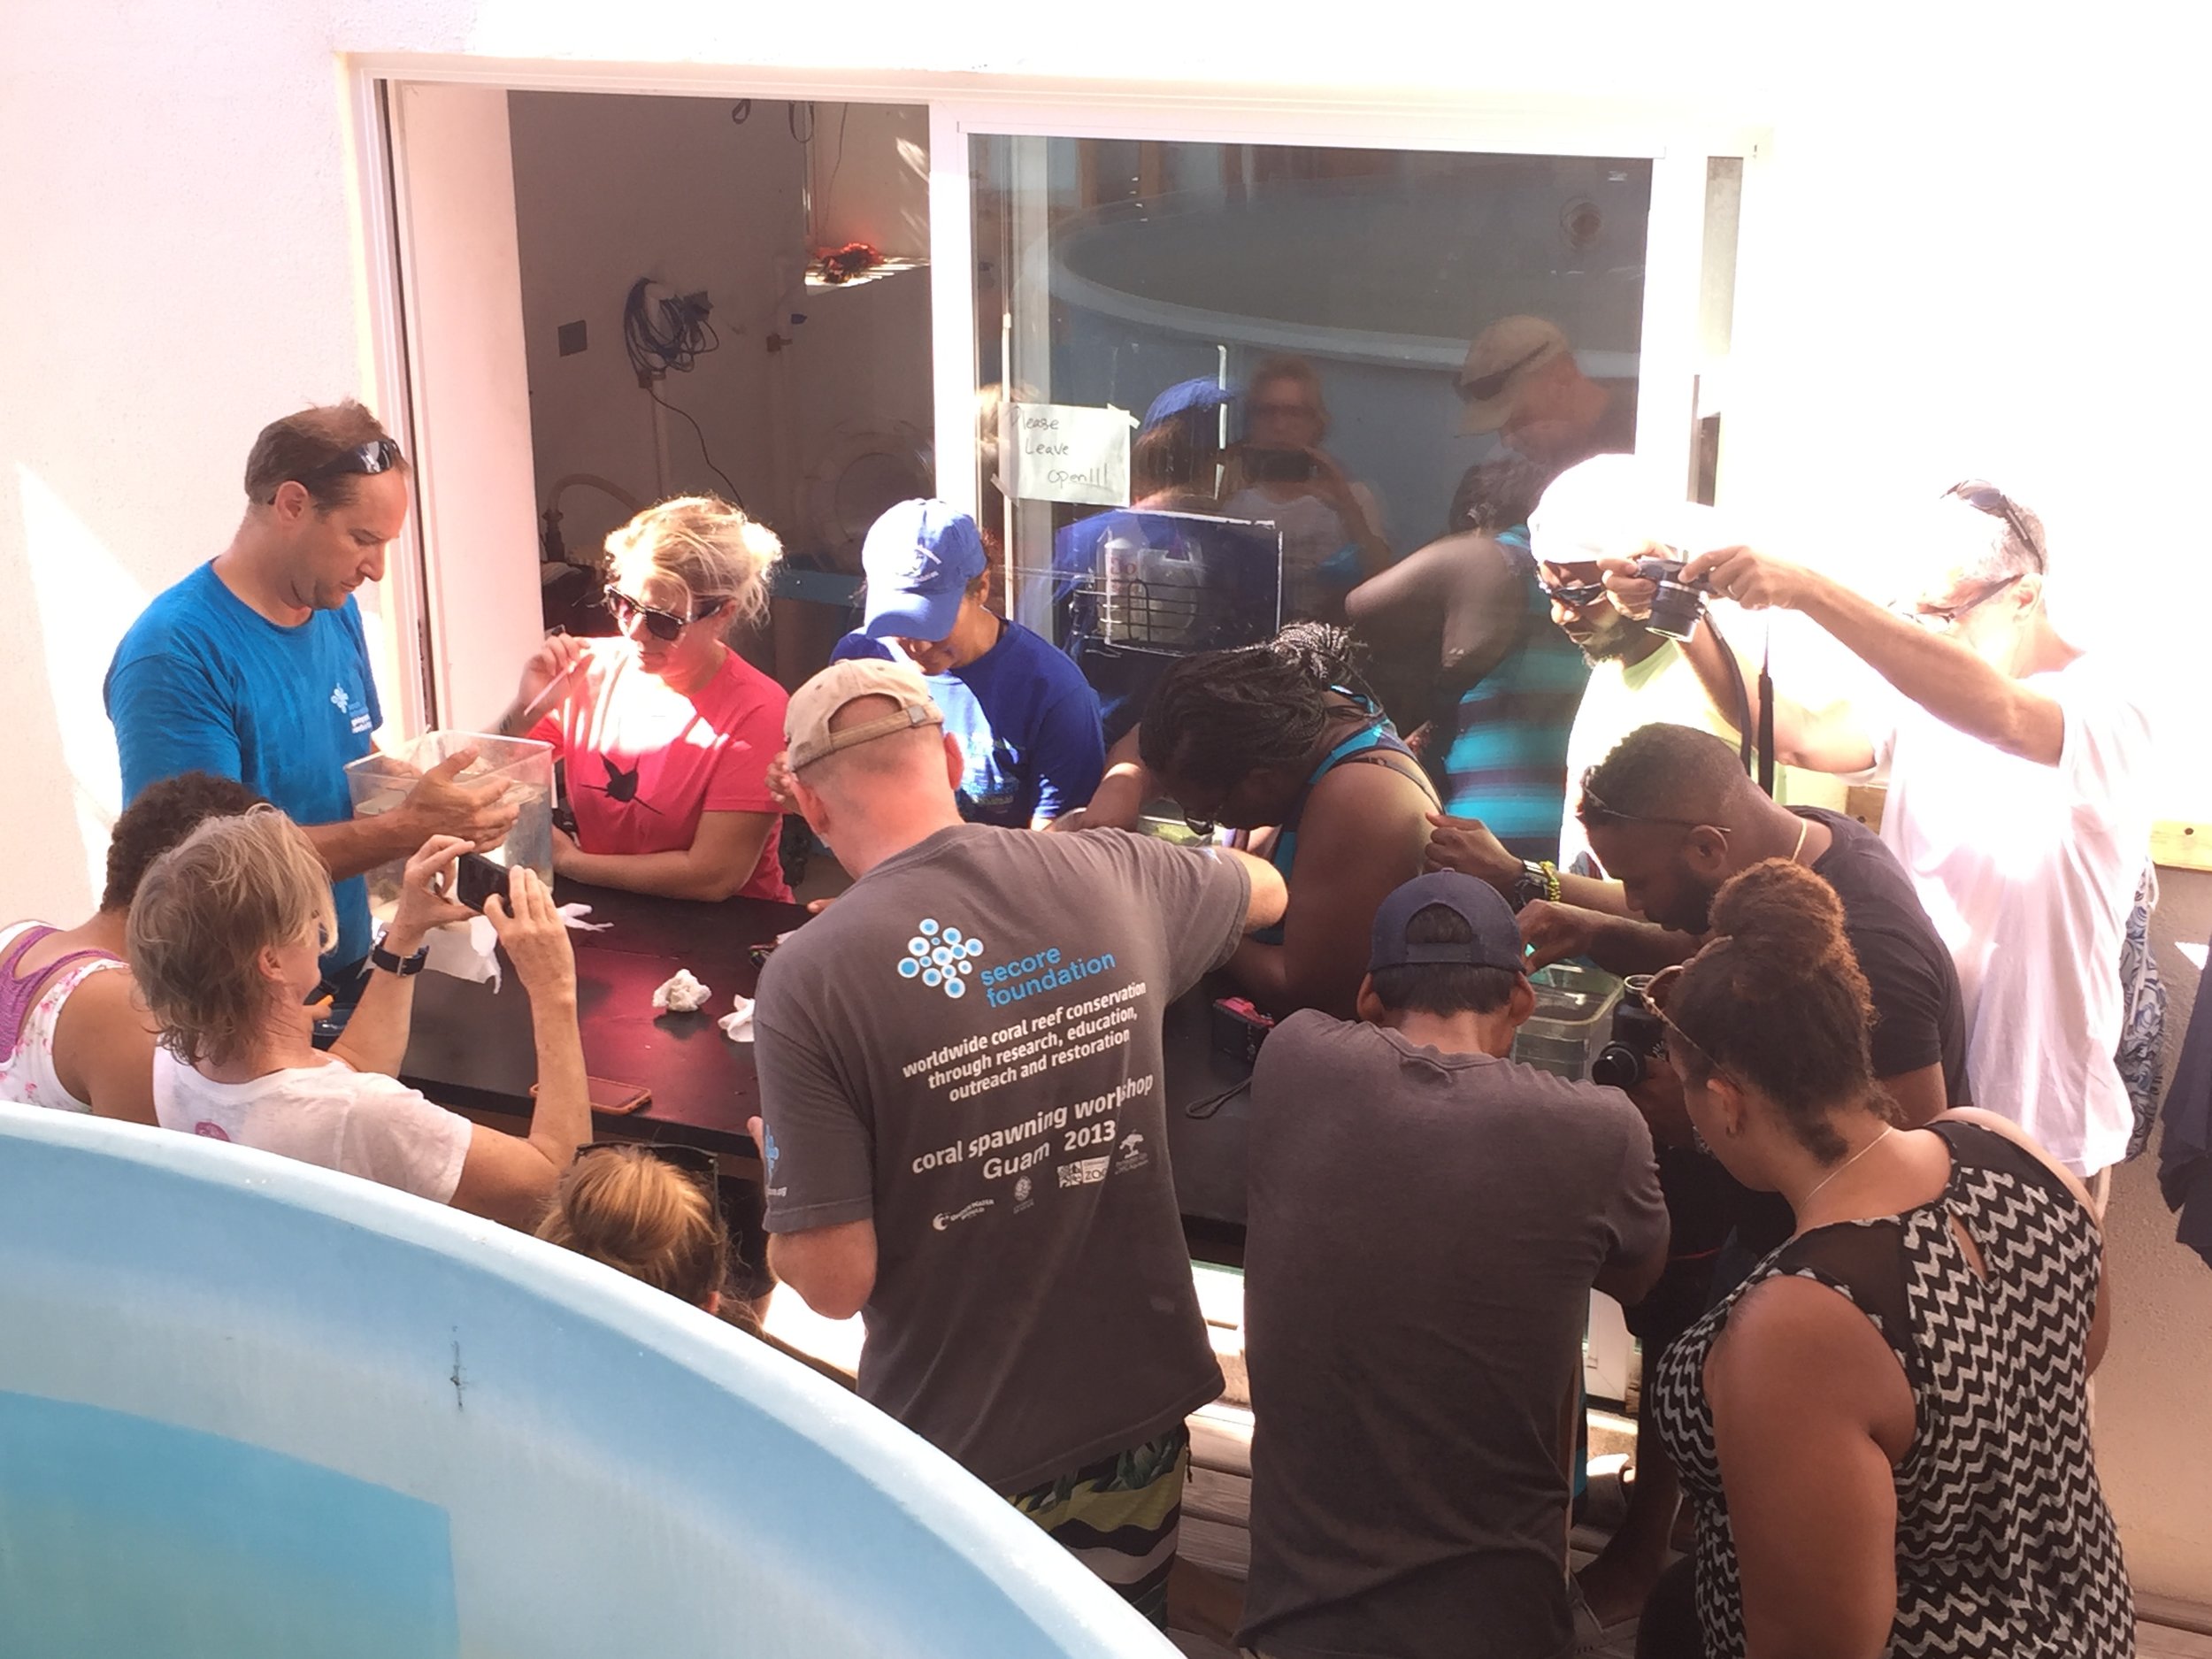 Coral reproduction workshop led by Dr. Dirk Peterson from SECORE International. Here, various scientists and conservationists are collecting brooding coral larvae from individual tanks to be observed under the microscope!